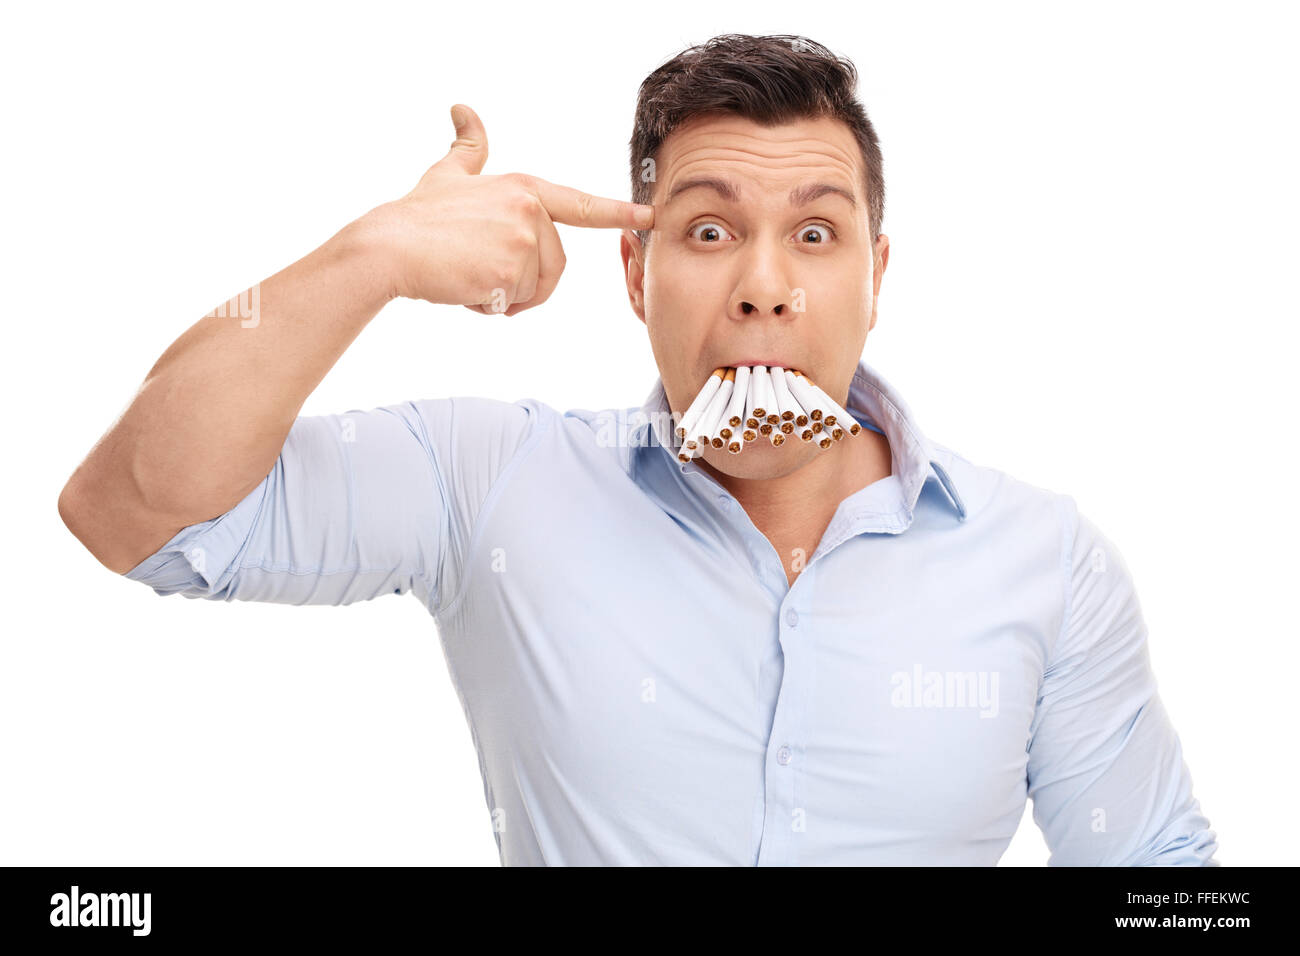 Studio shot of a man with a bunch of cigarettes in his mouth holding a hand gun against his head isolated on white background Stock Photo